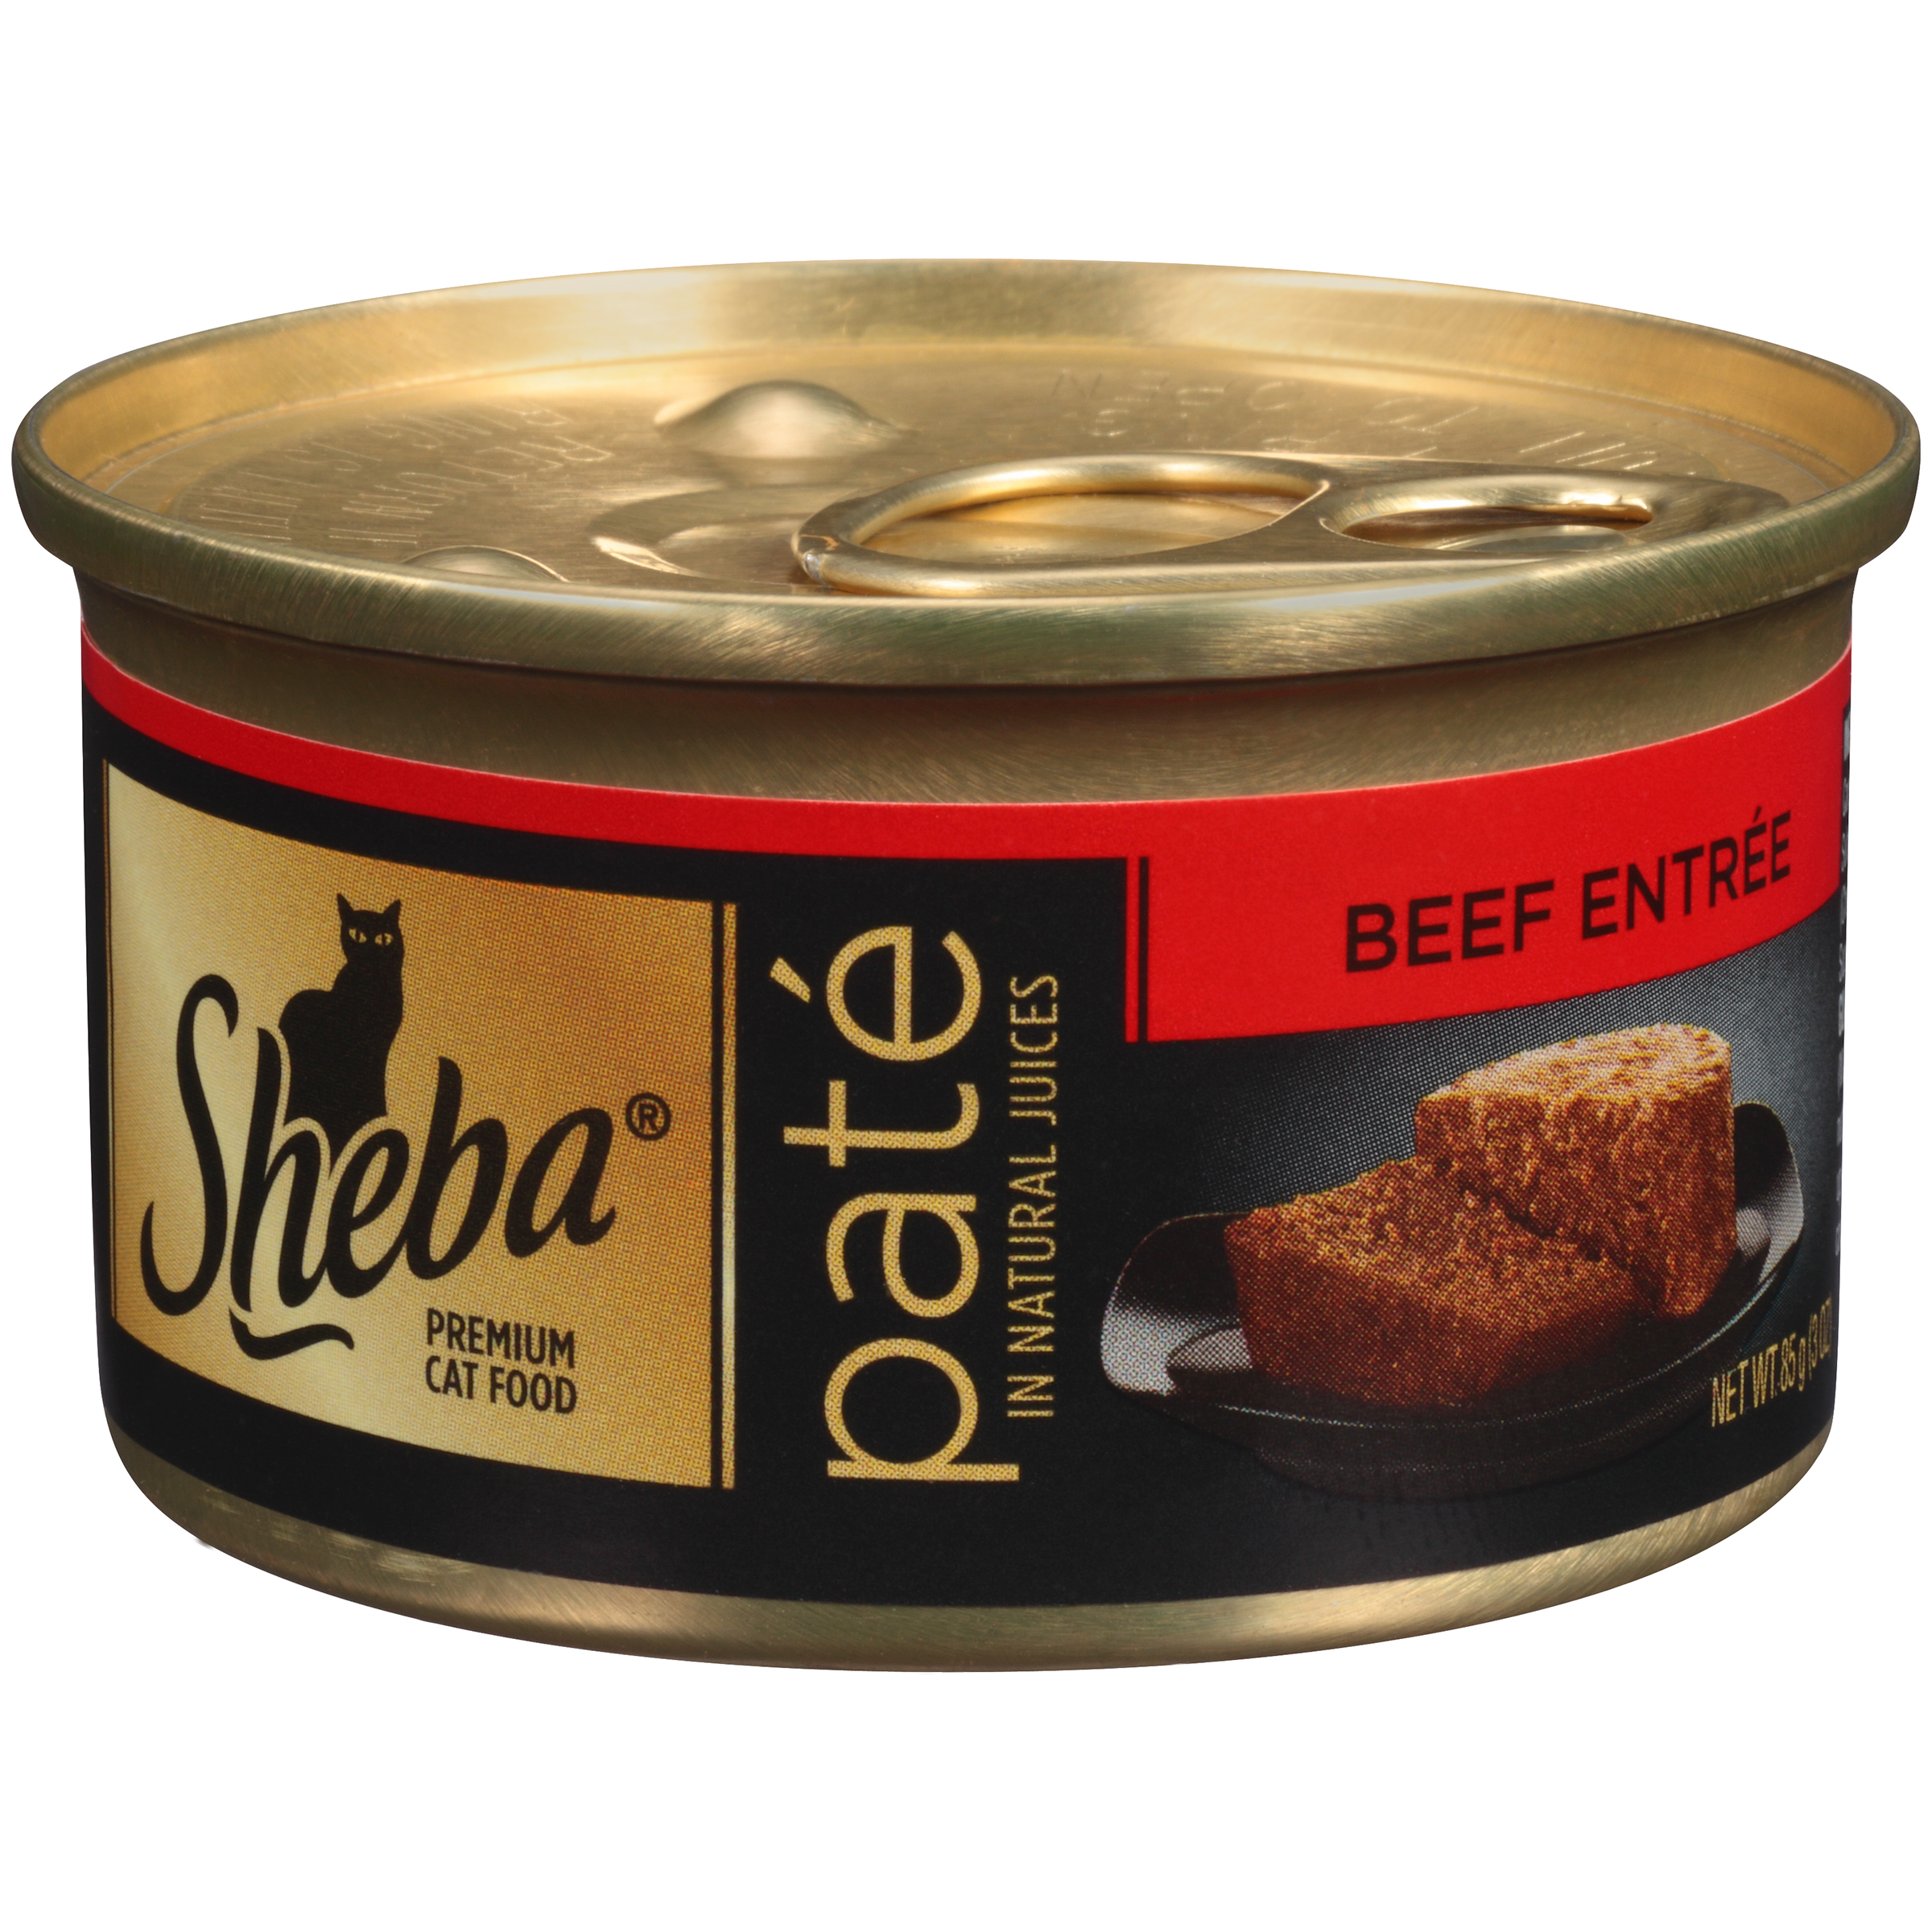 0023100102931 - PATE IN NATURAL JUICES BEEF ENTREE (PS #5179921) WET CAT FOOD